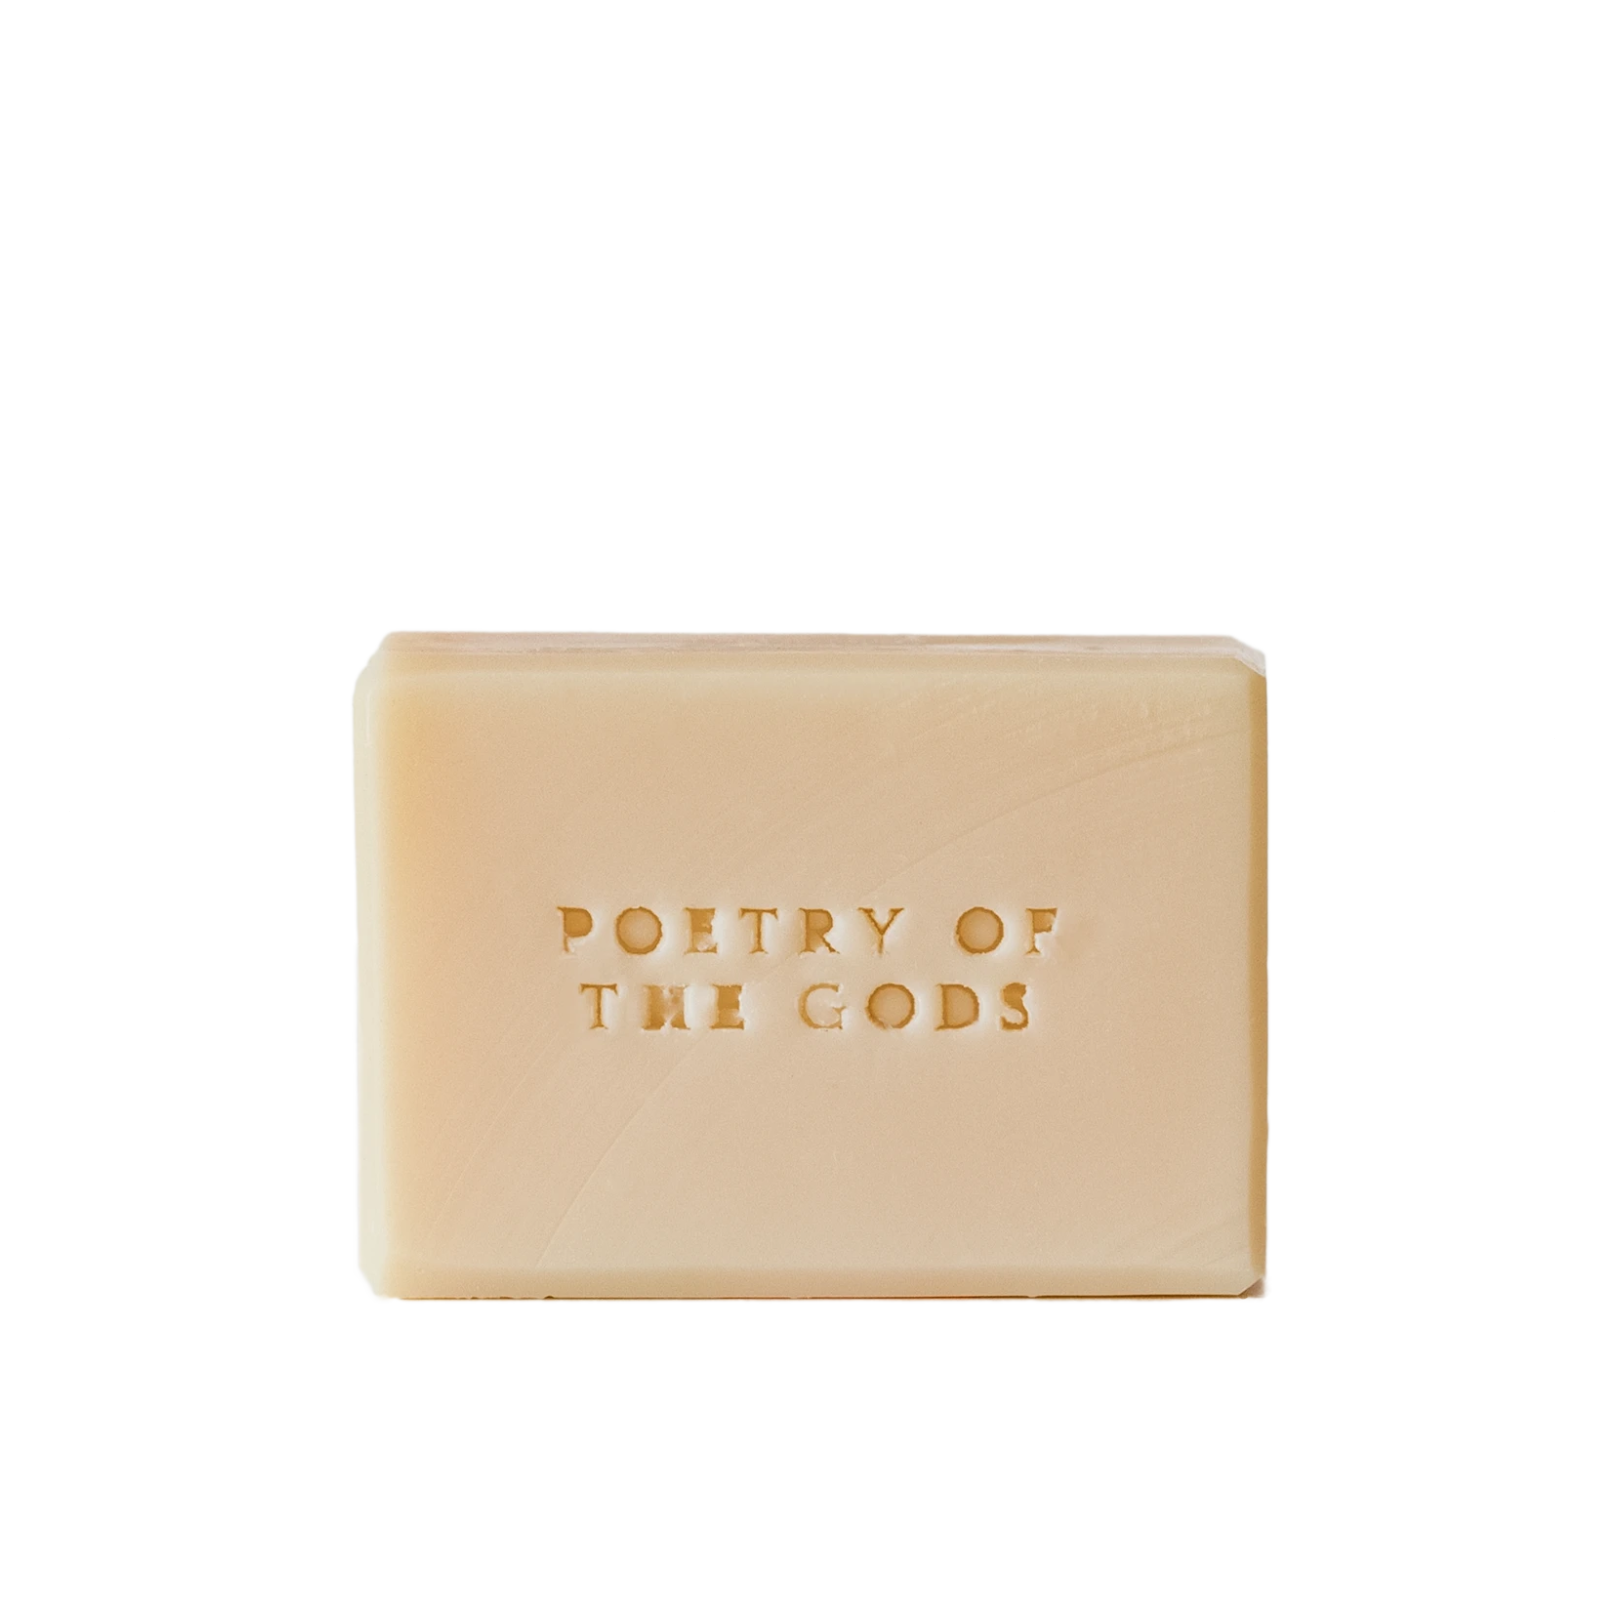 Calabria Dreamin' Soap Bar | Sumptuous soap bar with lavender and seaside citrus